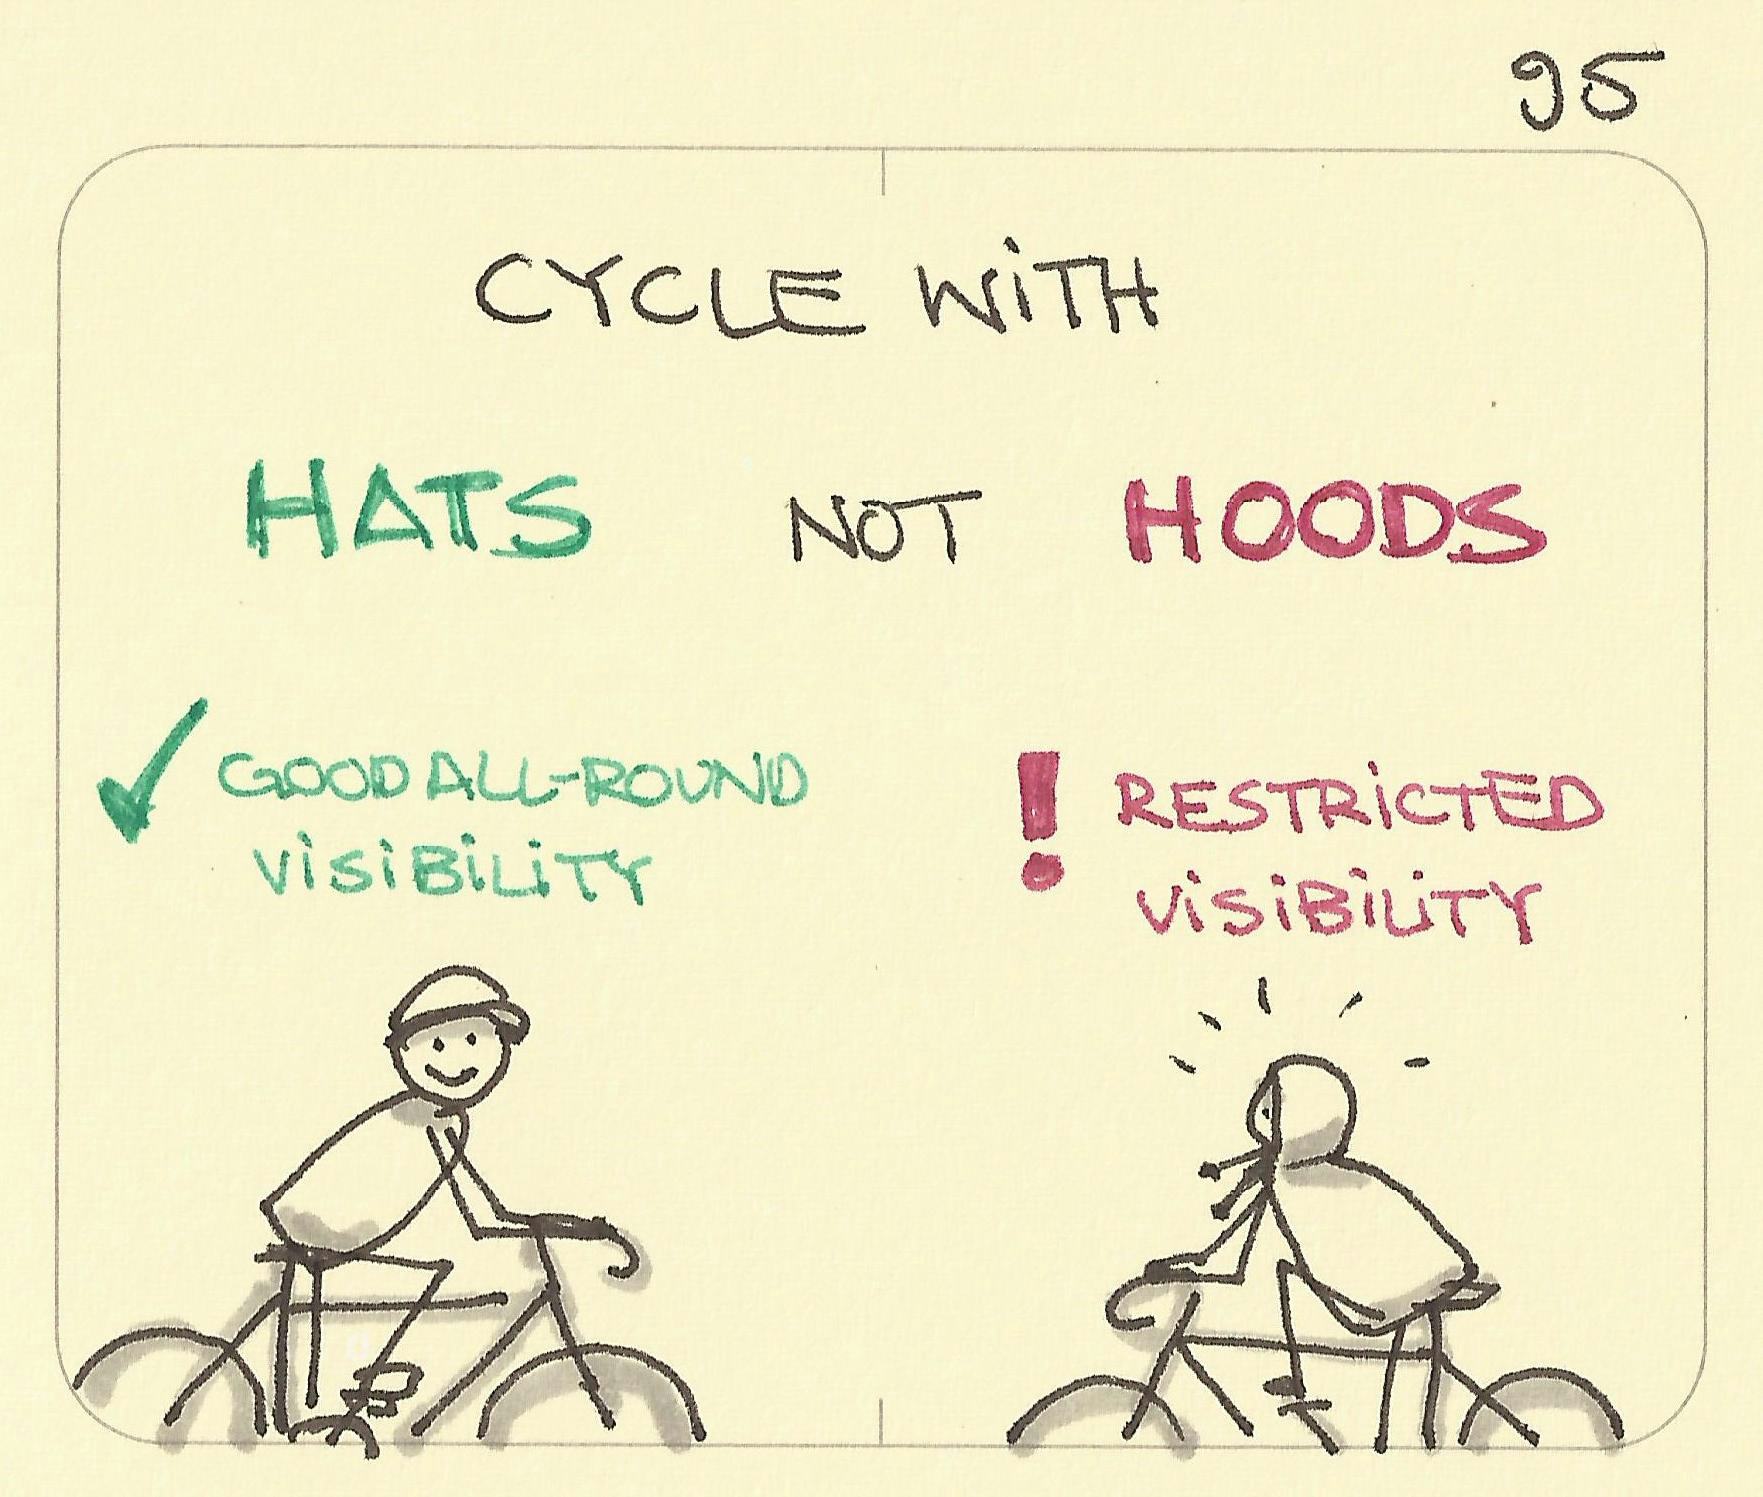 Cycle with hats not hoods - Sketchplanations